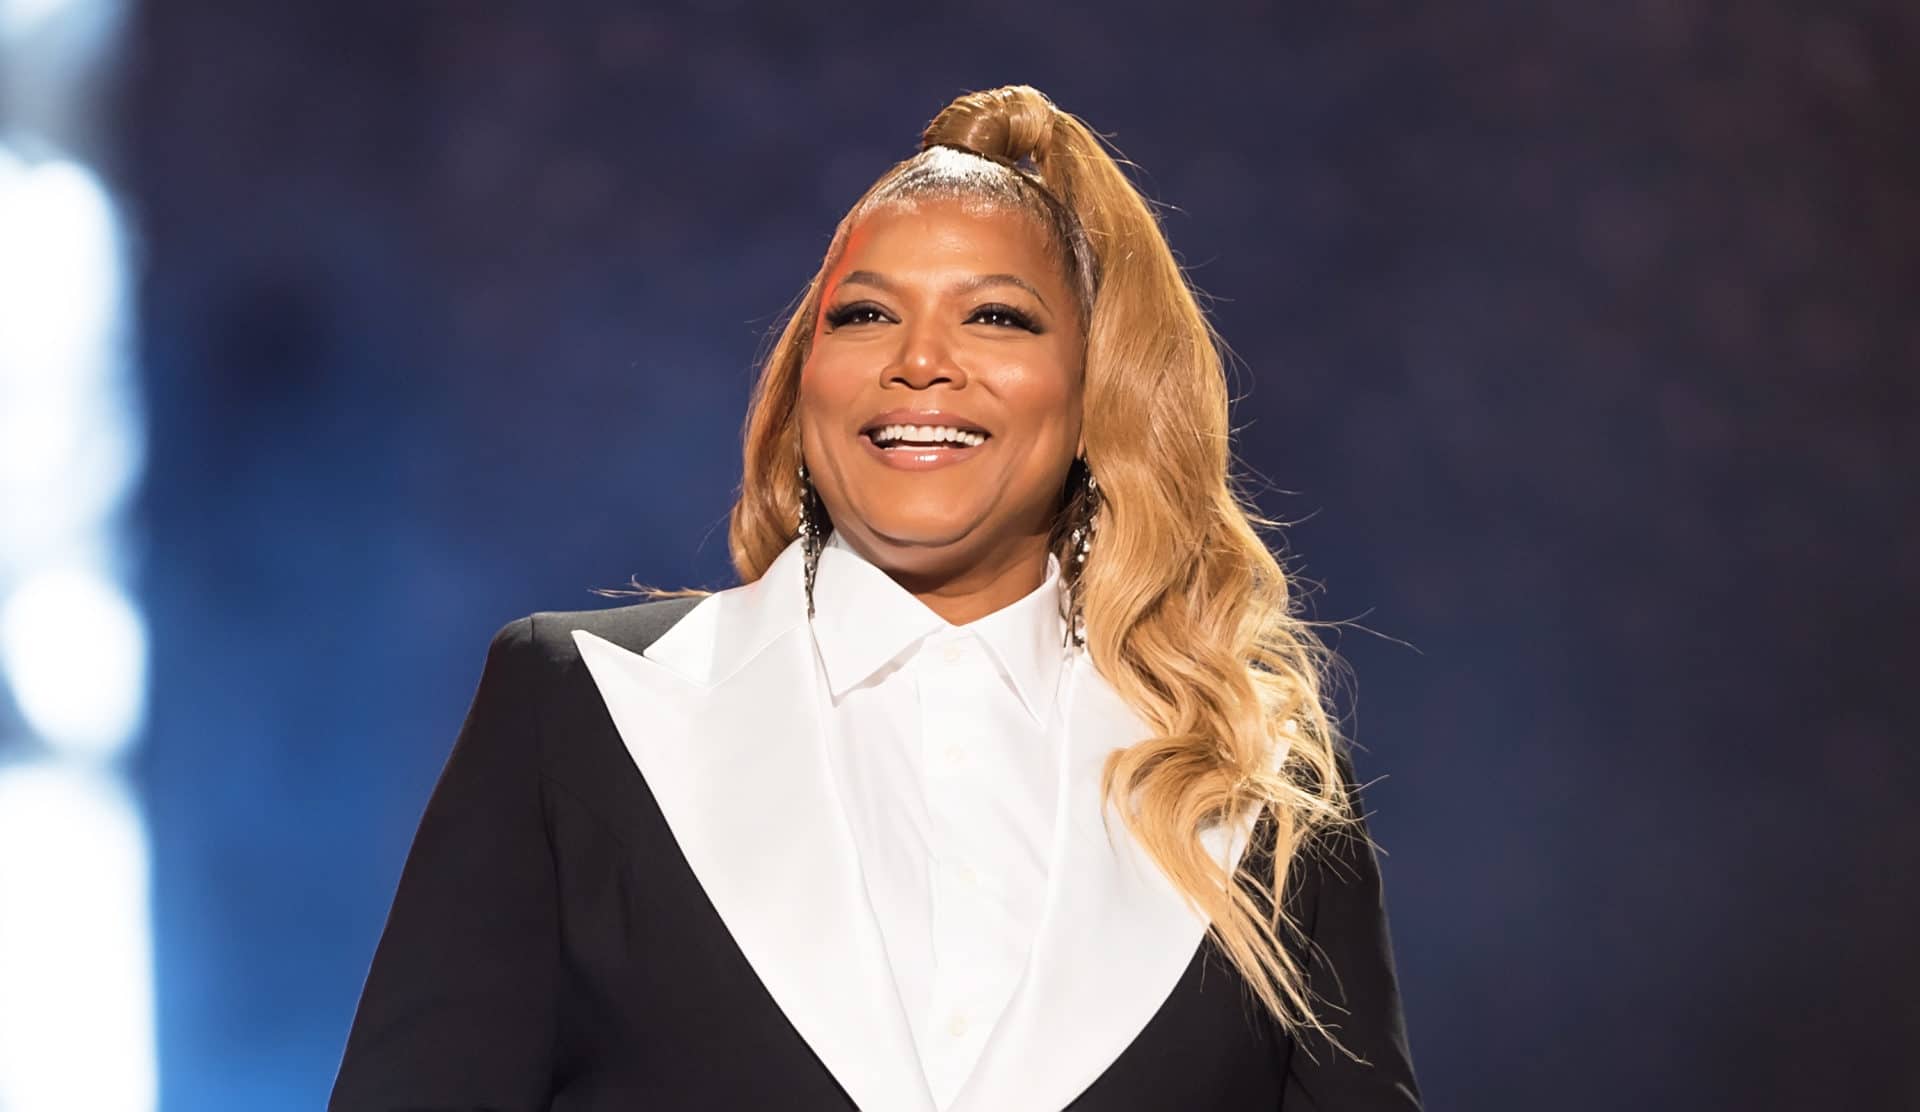 Watch Queen Latifah Talk About Motherhood And What Type Of Mother She Hopes To Be